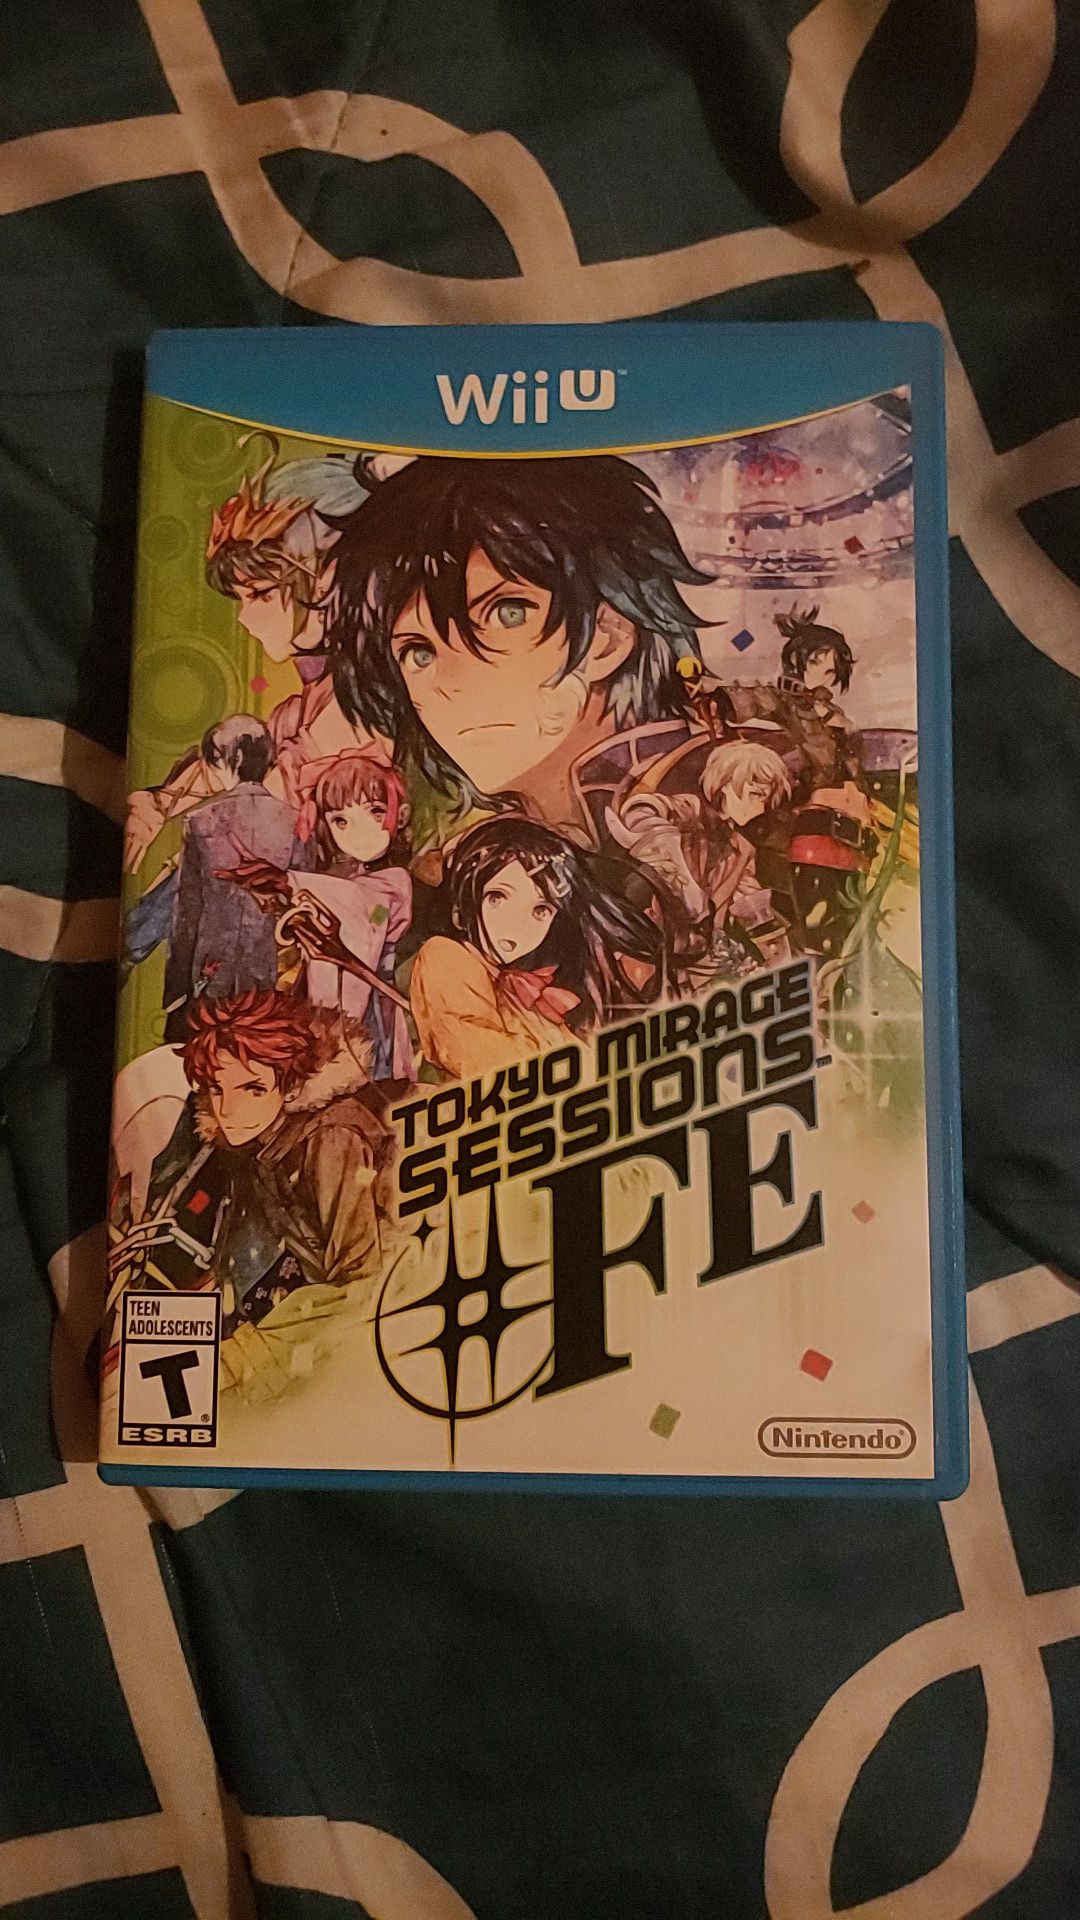 Tokyo Mirage Sessions #FE For Wii U